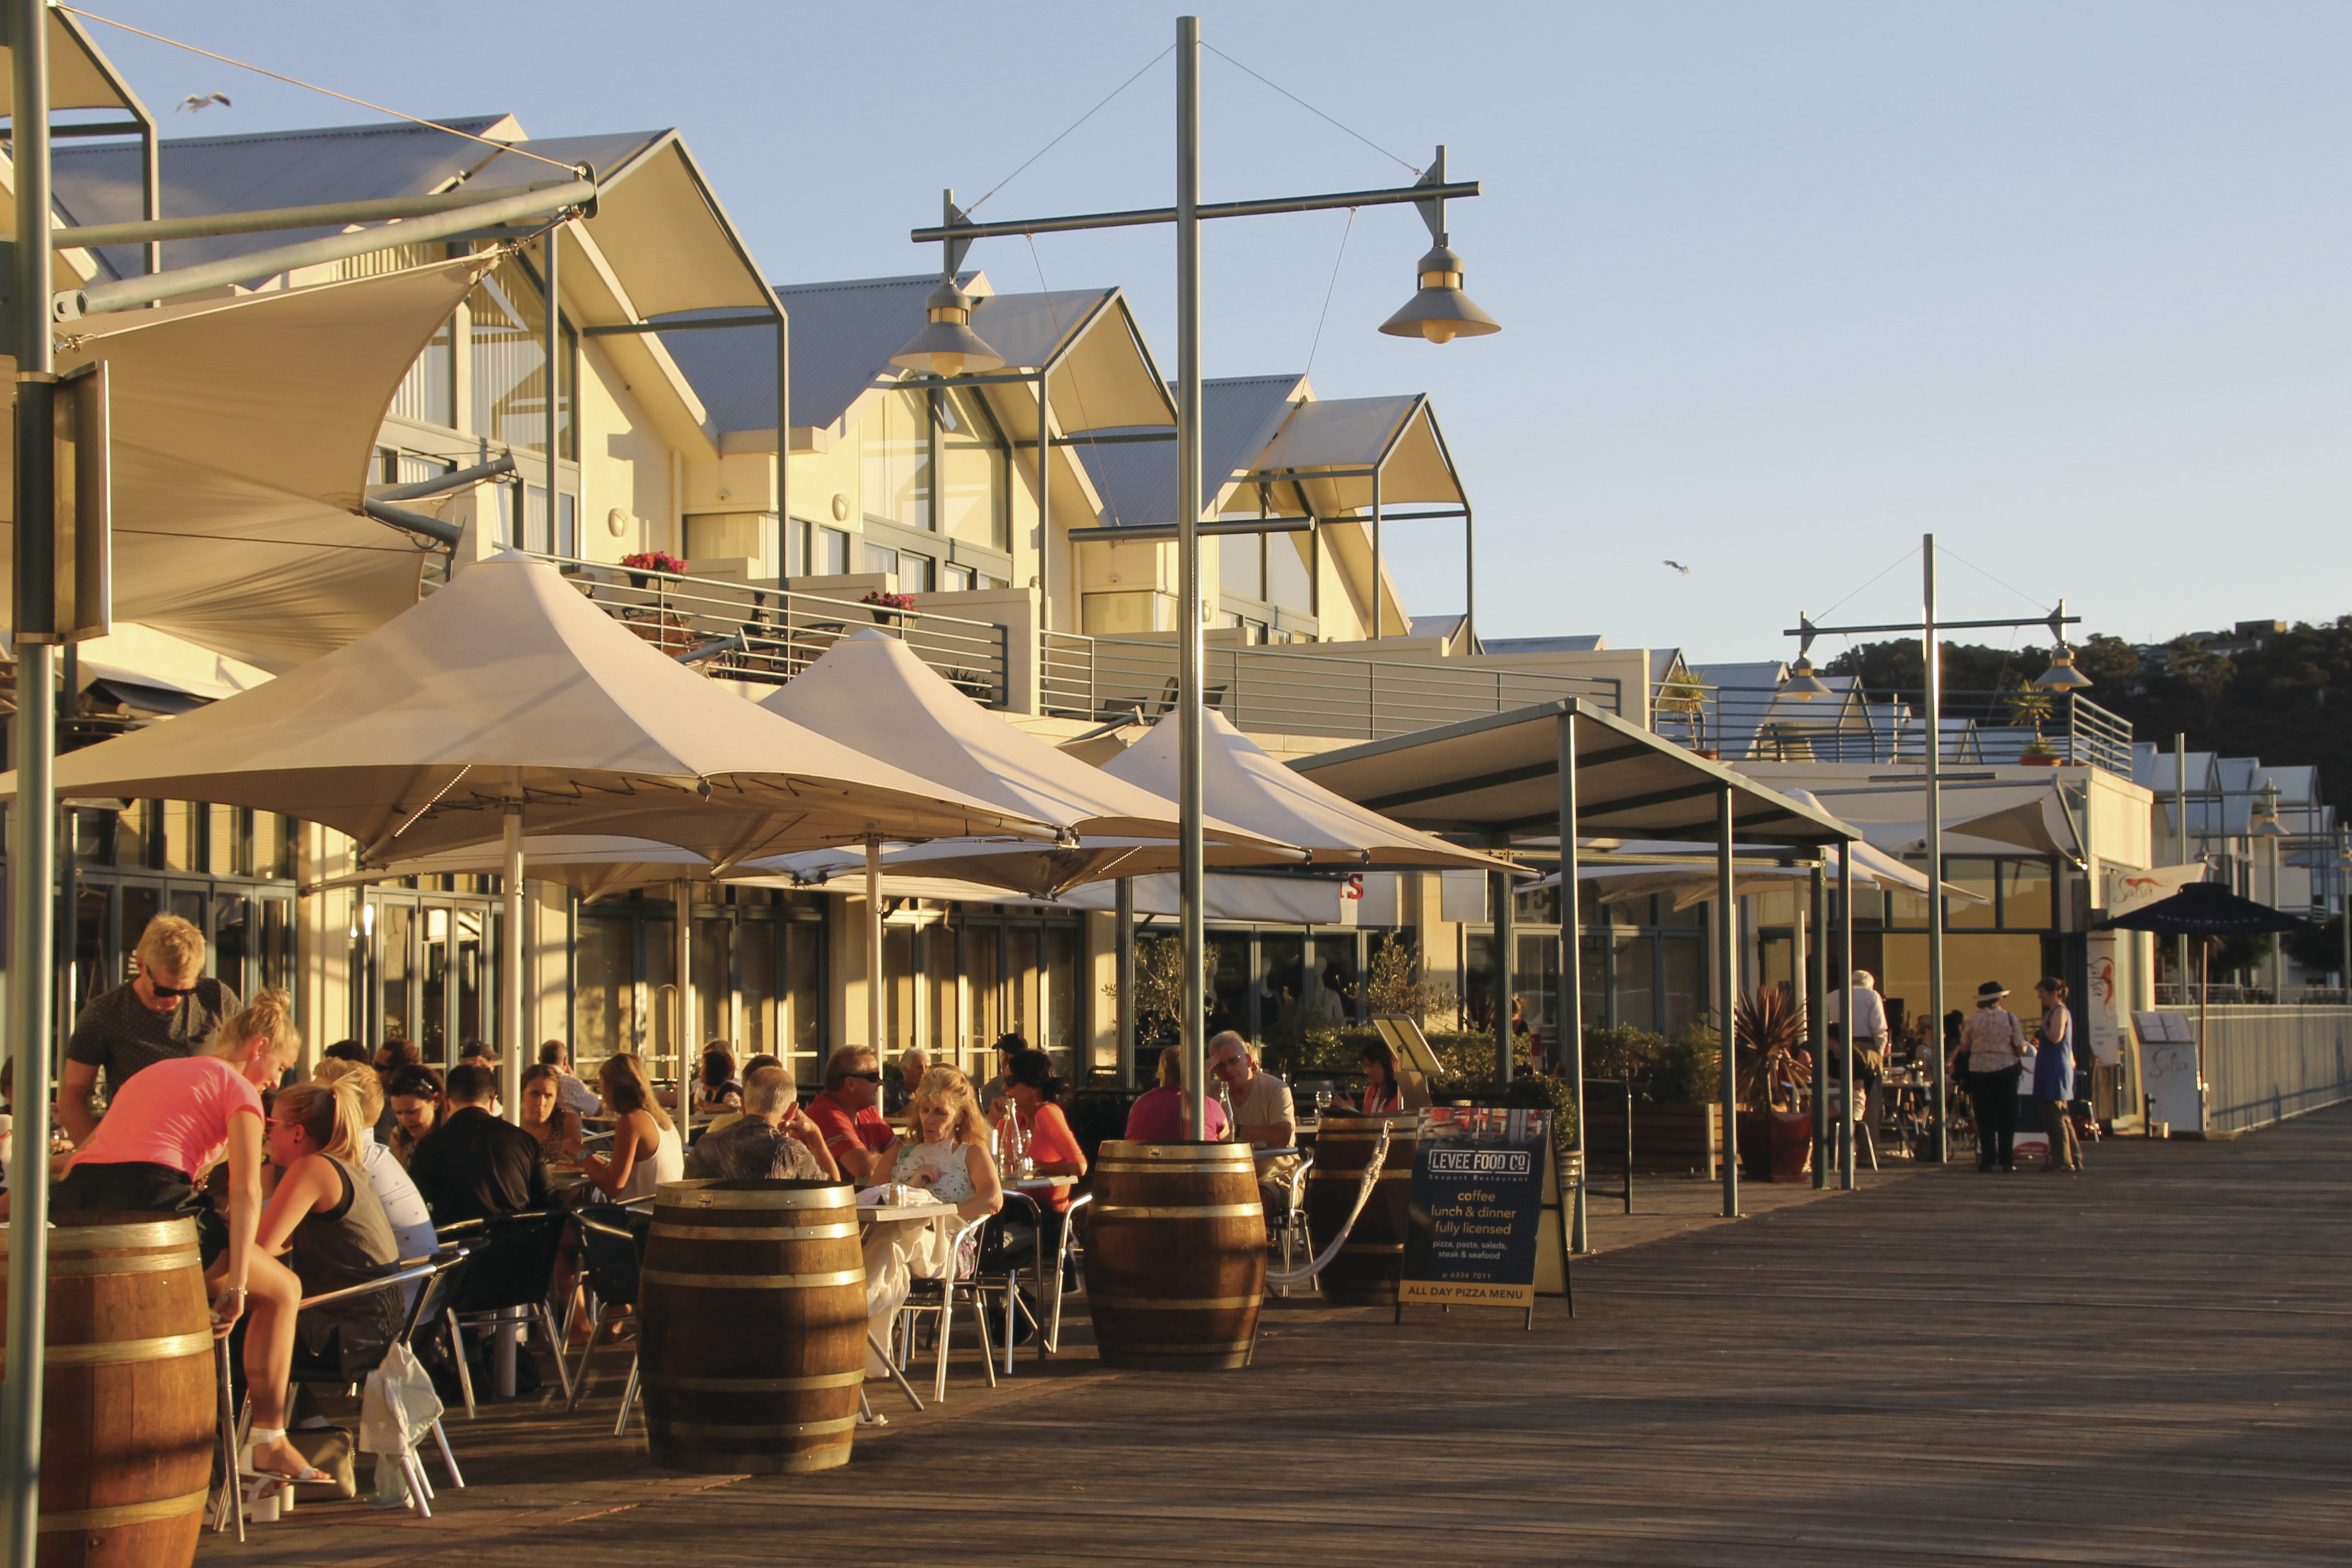 Crowds enjoy food and drink in the sun at the cafes and restaurants along Launceston Seaport boardwalk.